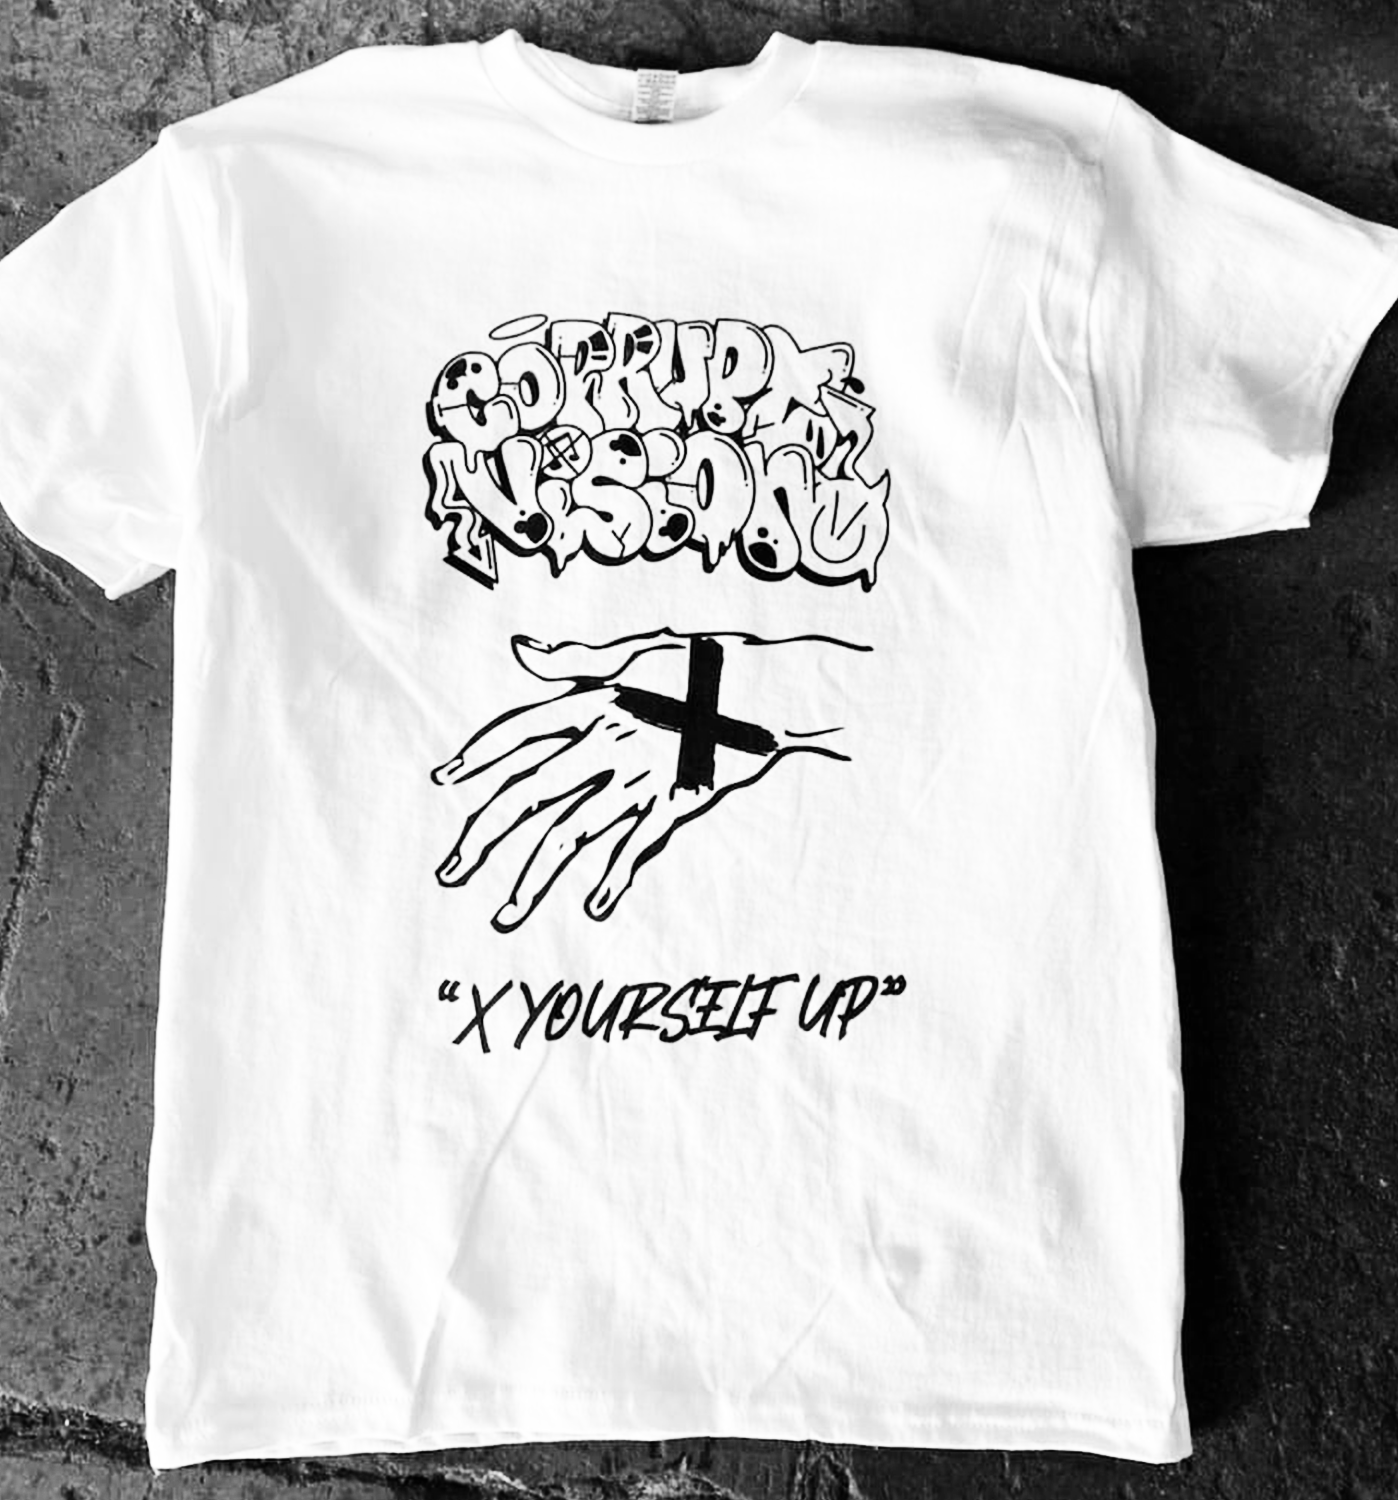 Corrupt Vision - "X YOURSELF UP" Shirt - XL